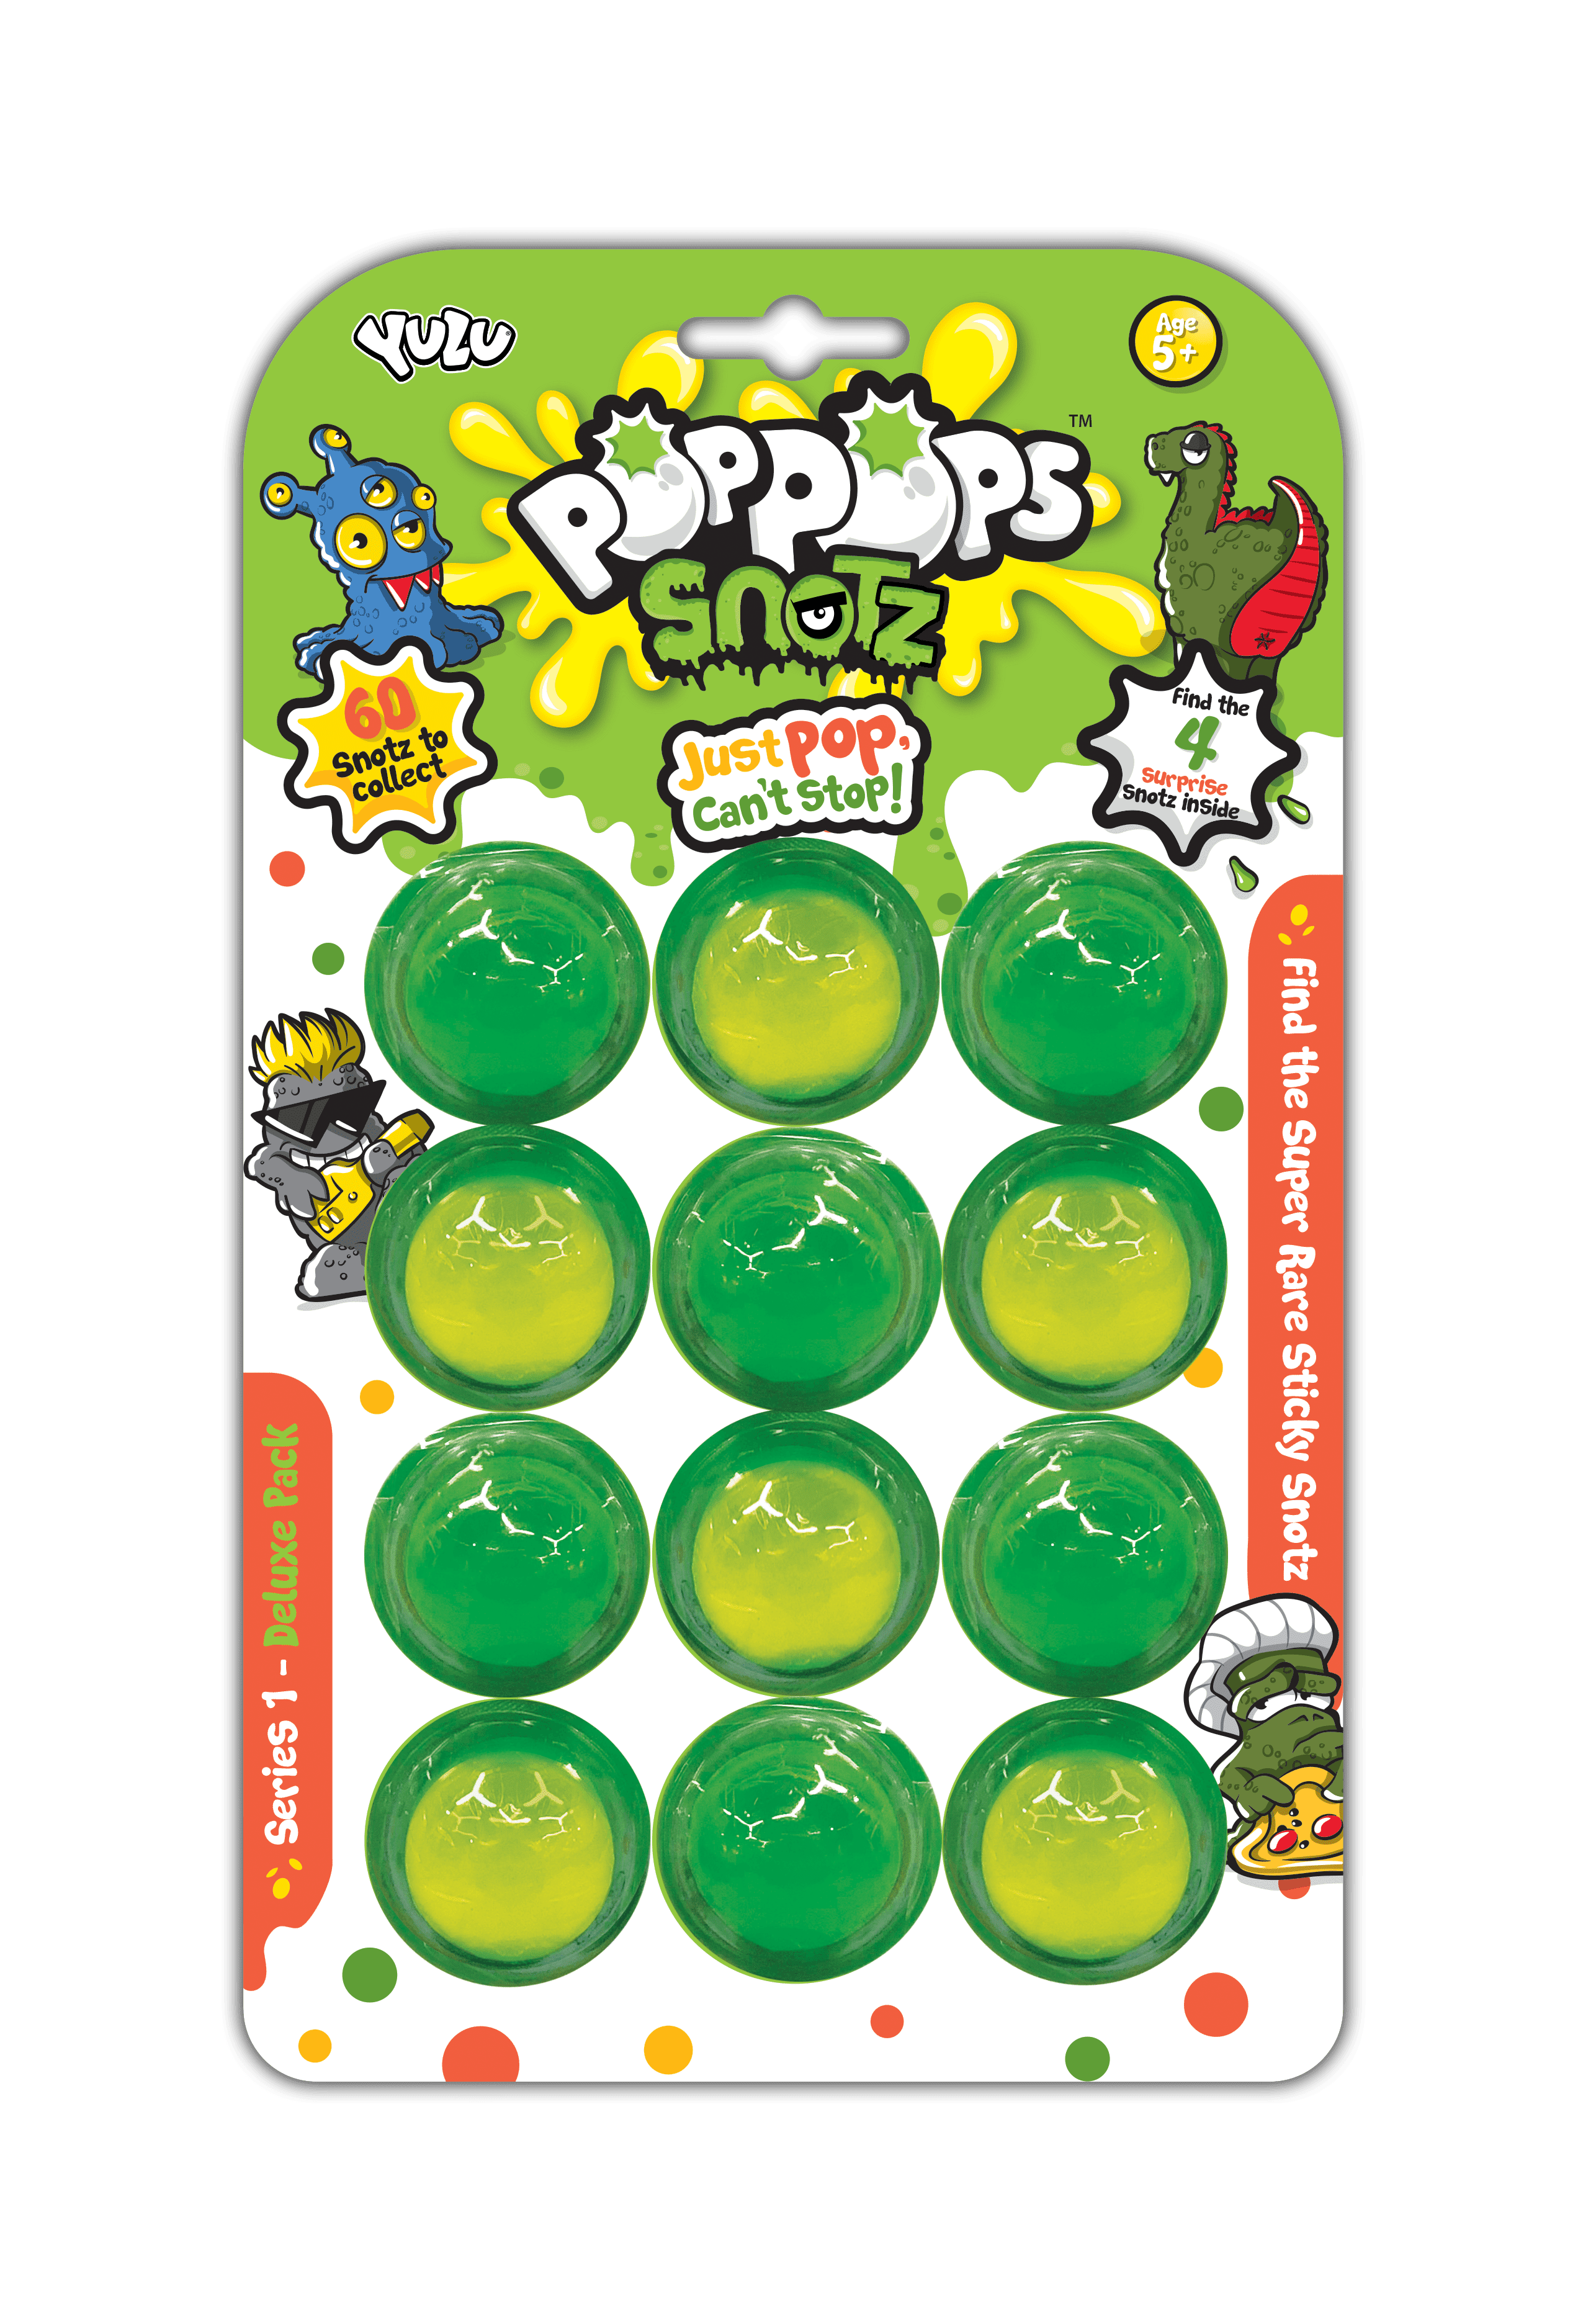 New 8 PopPops Snotz Series 1 Deluxe Pack Case 12 Snot Pop Bubbles Figures Slime 